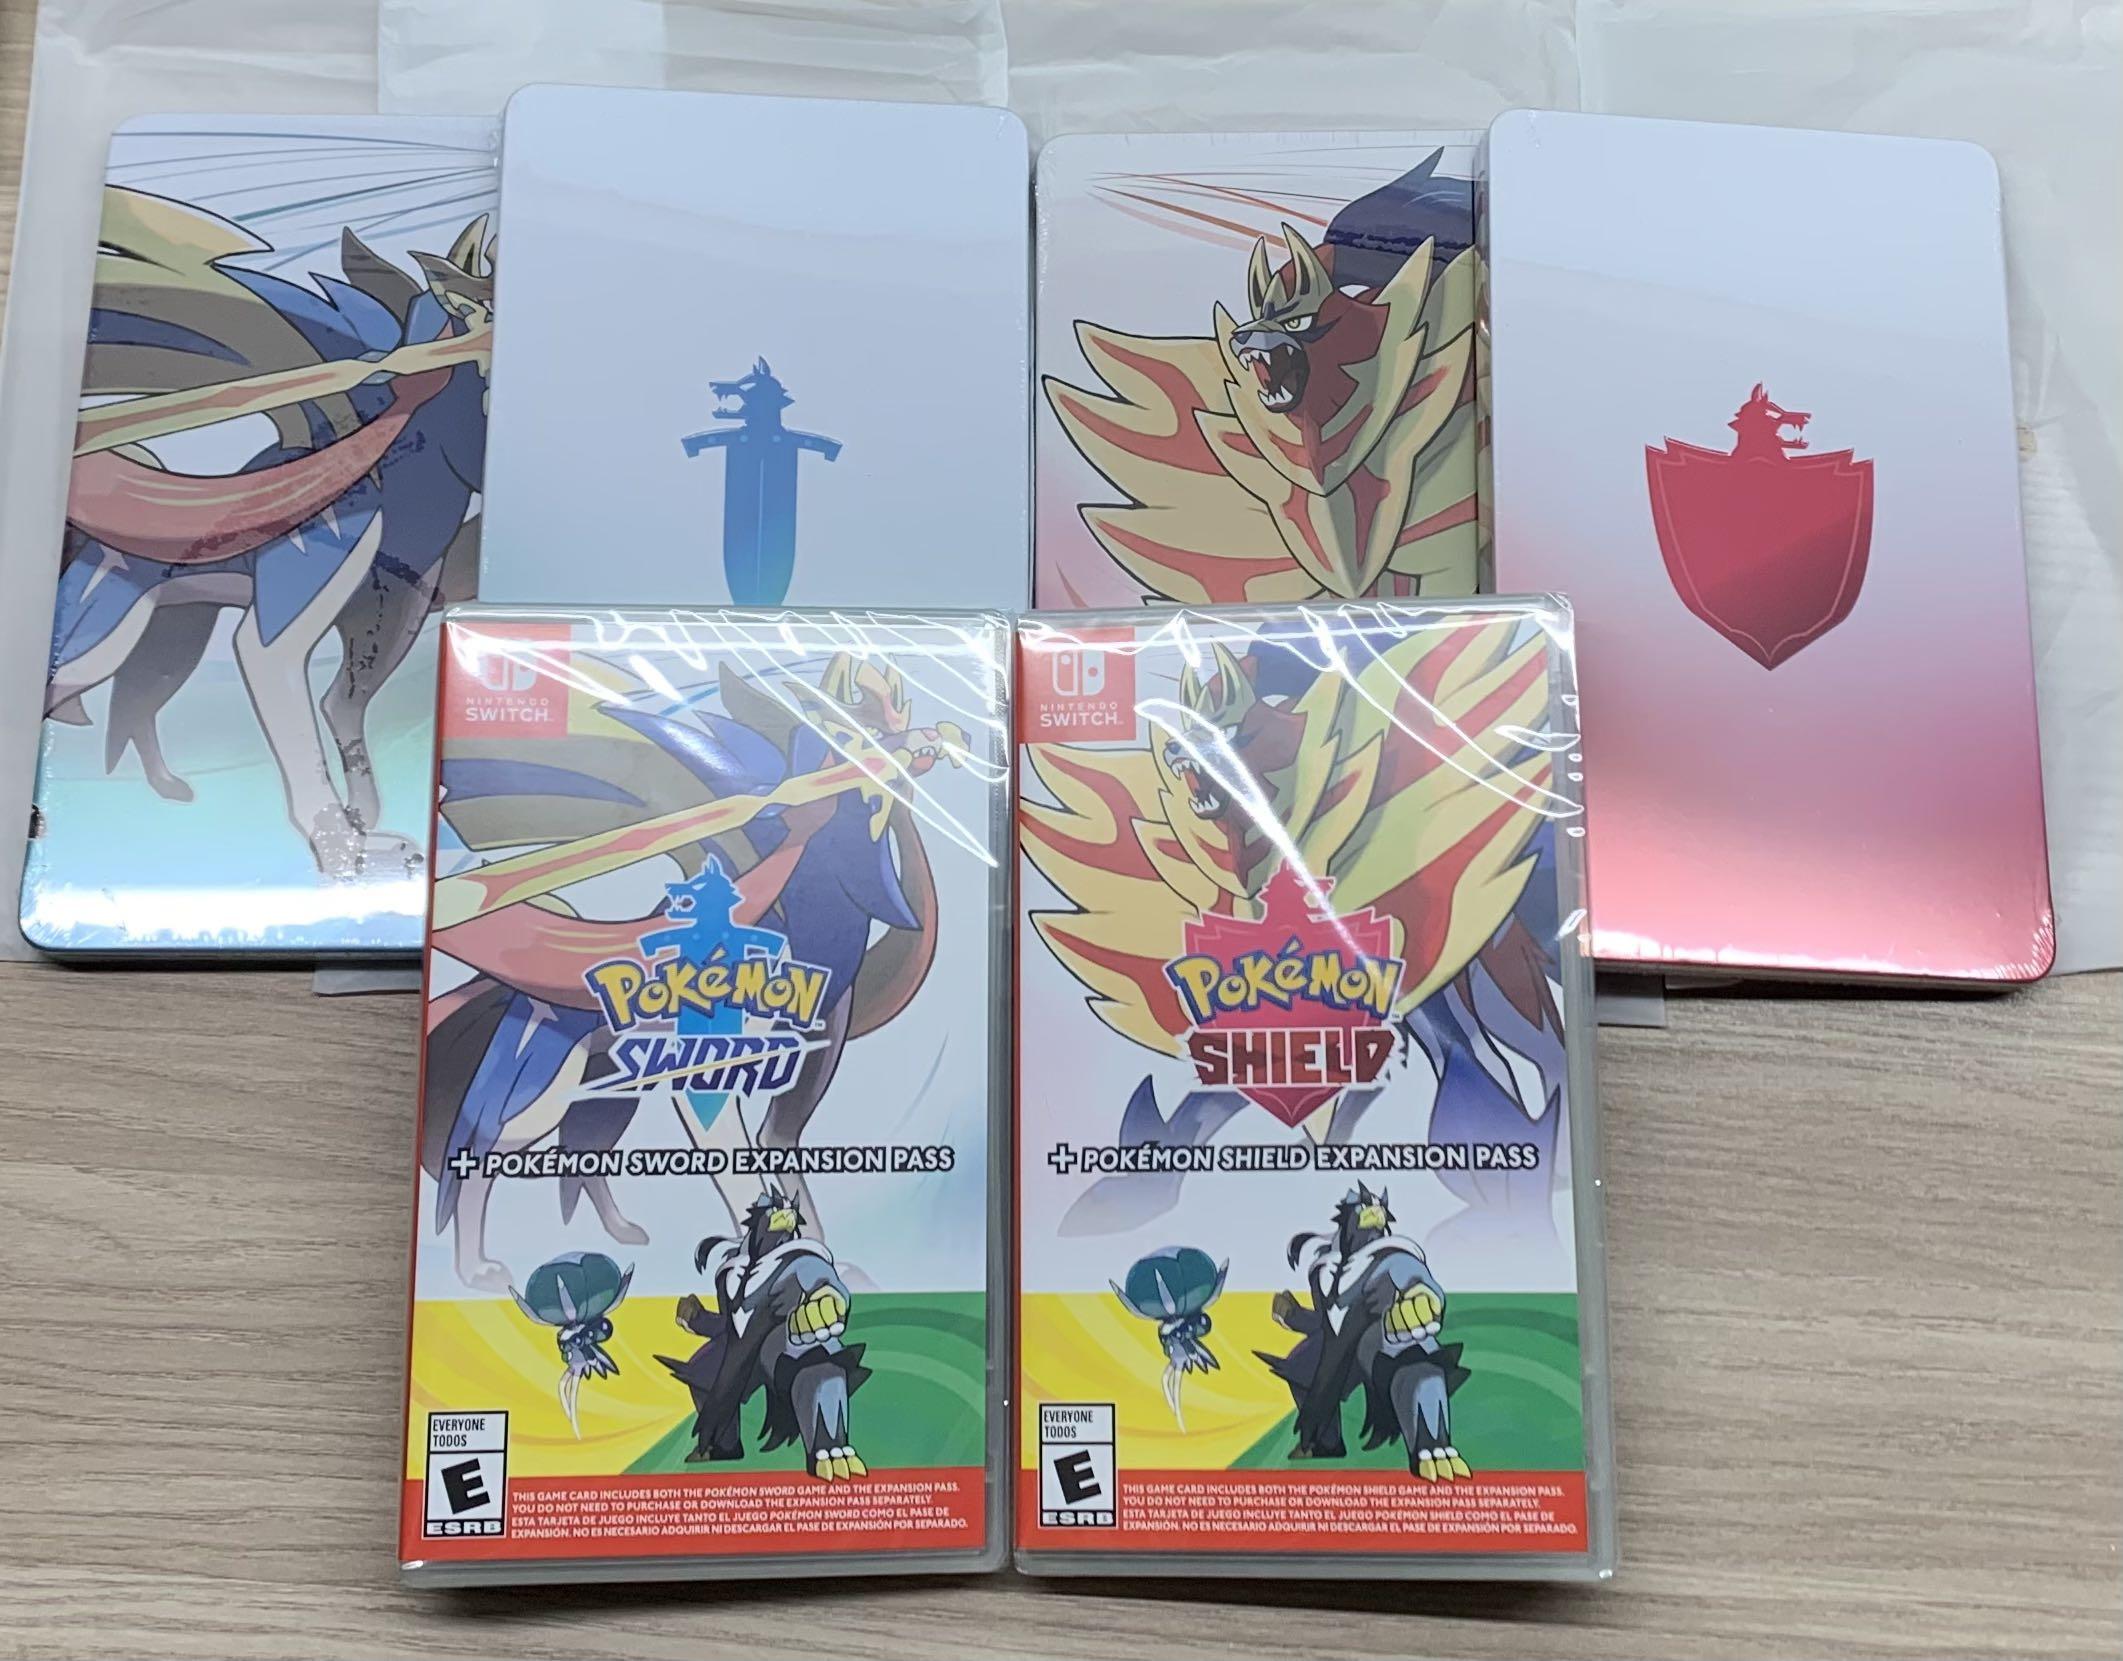 Out Of Stock Pokemon Sword Shield W Expansion Pass Switch Game Toys Games Video Gaming Video Games On Carousell